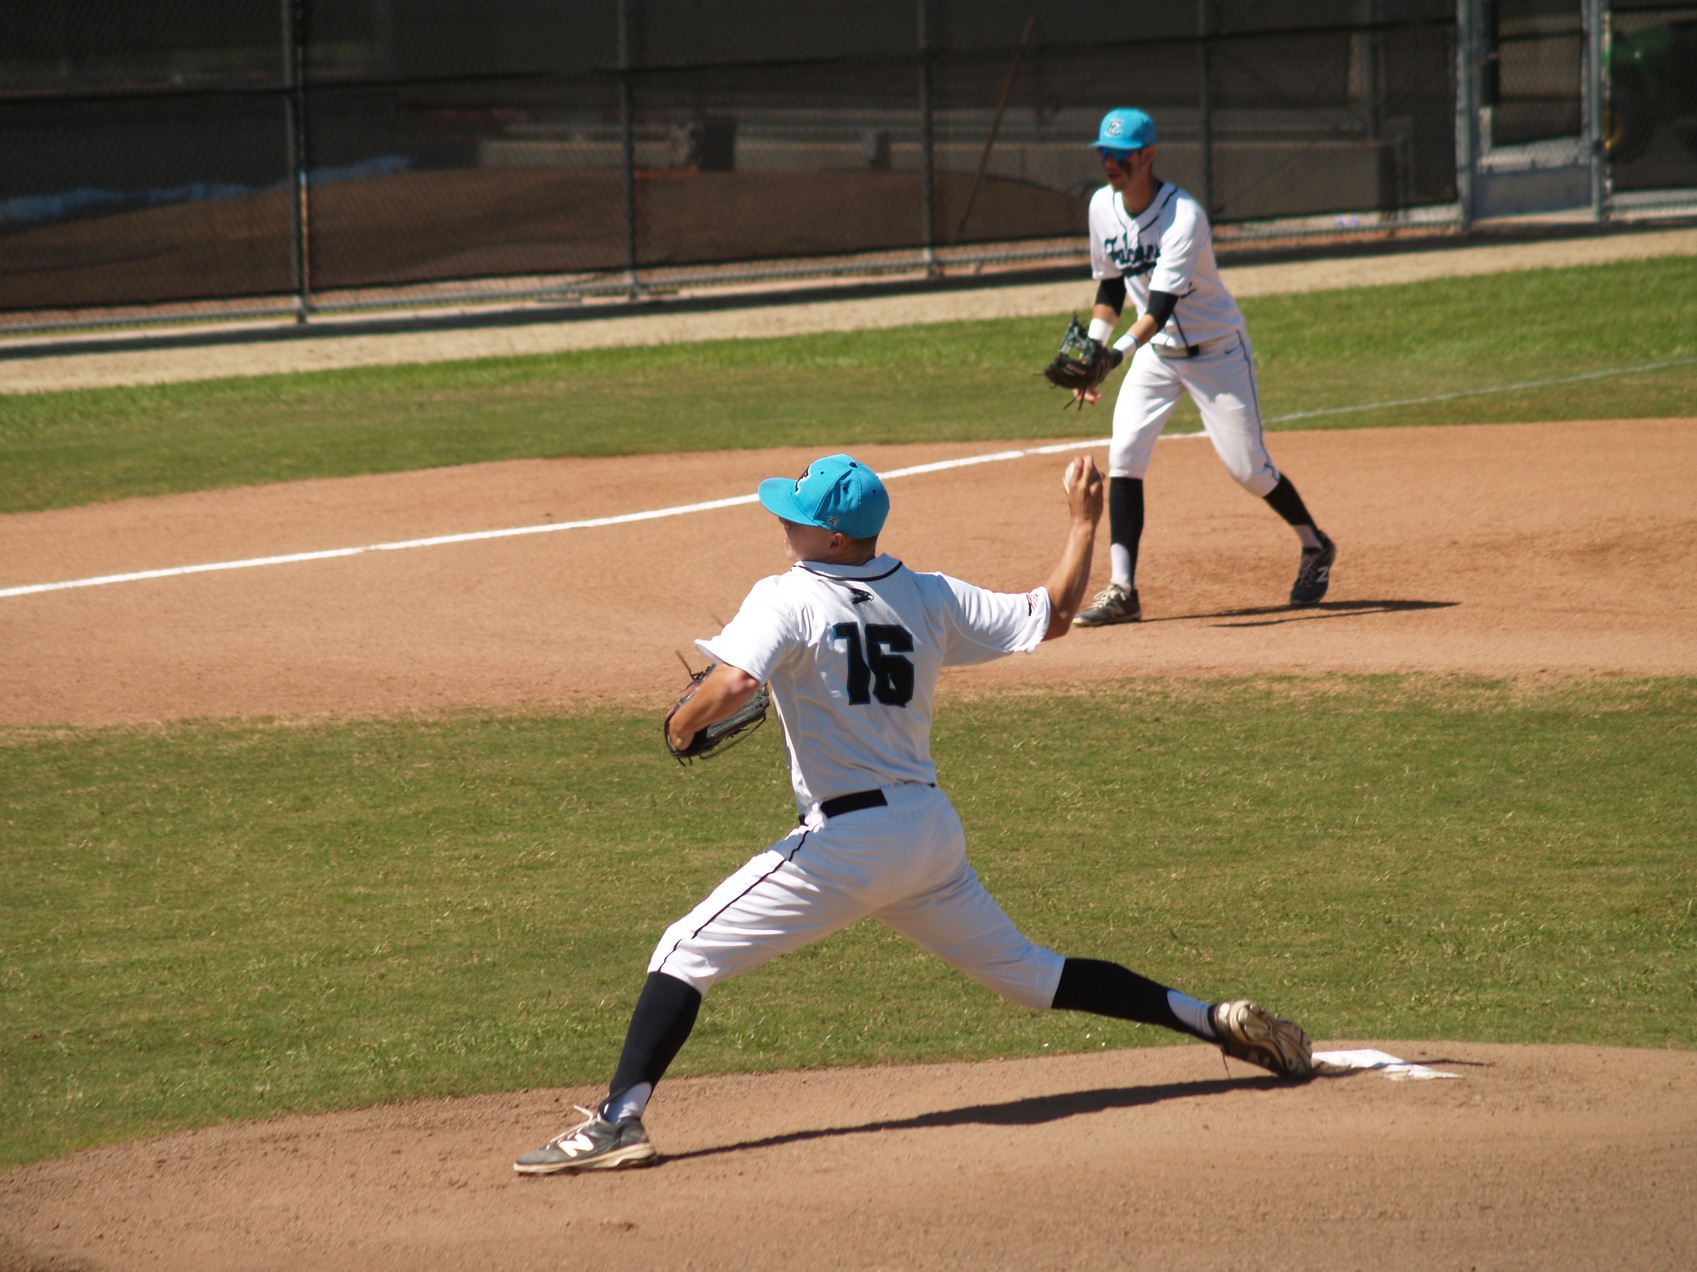 Falcons edged by Delta, 6-5